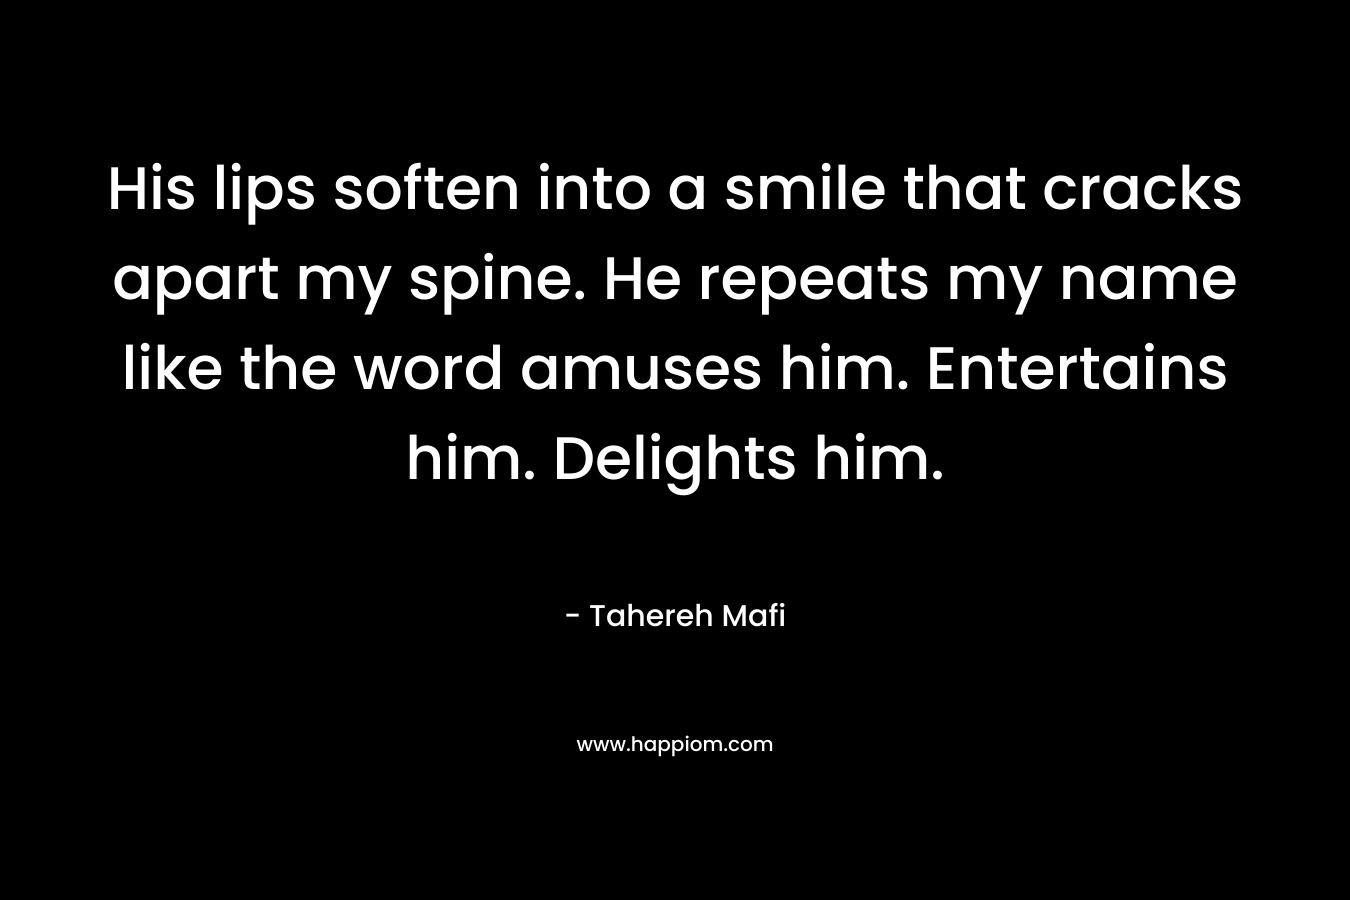 His lips soften into a smile that cracks apart my spine. He repeats my name like the word amuses him. Entertains him. Delights him.  – Tahereh Mafi